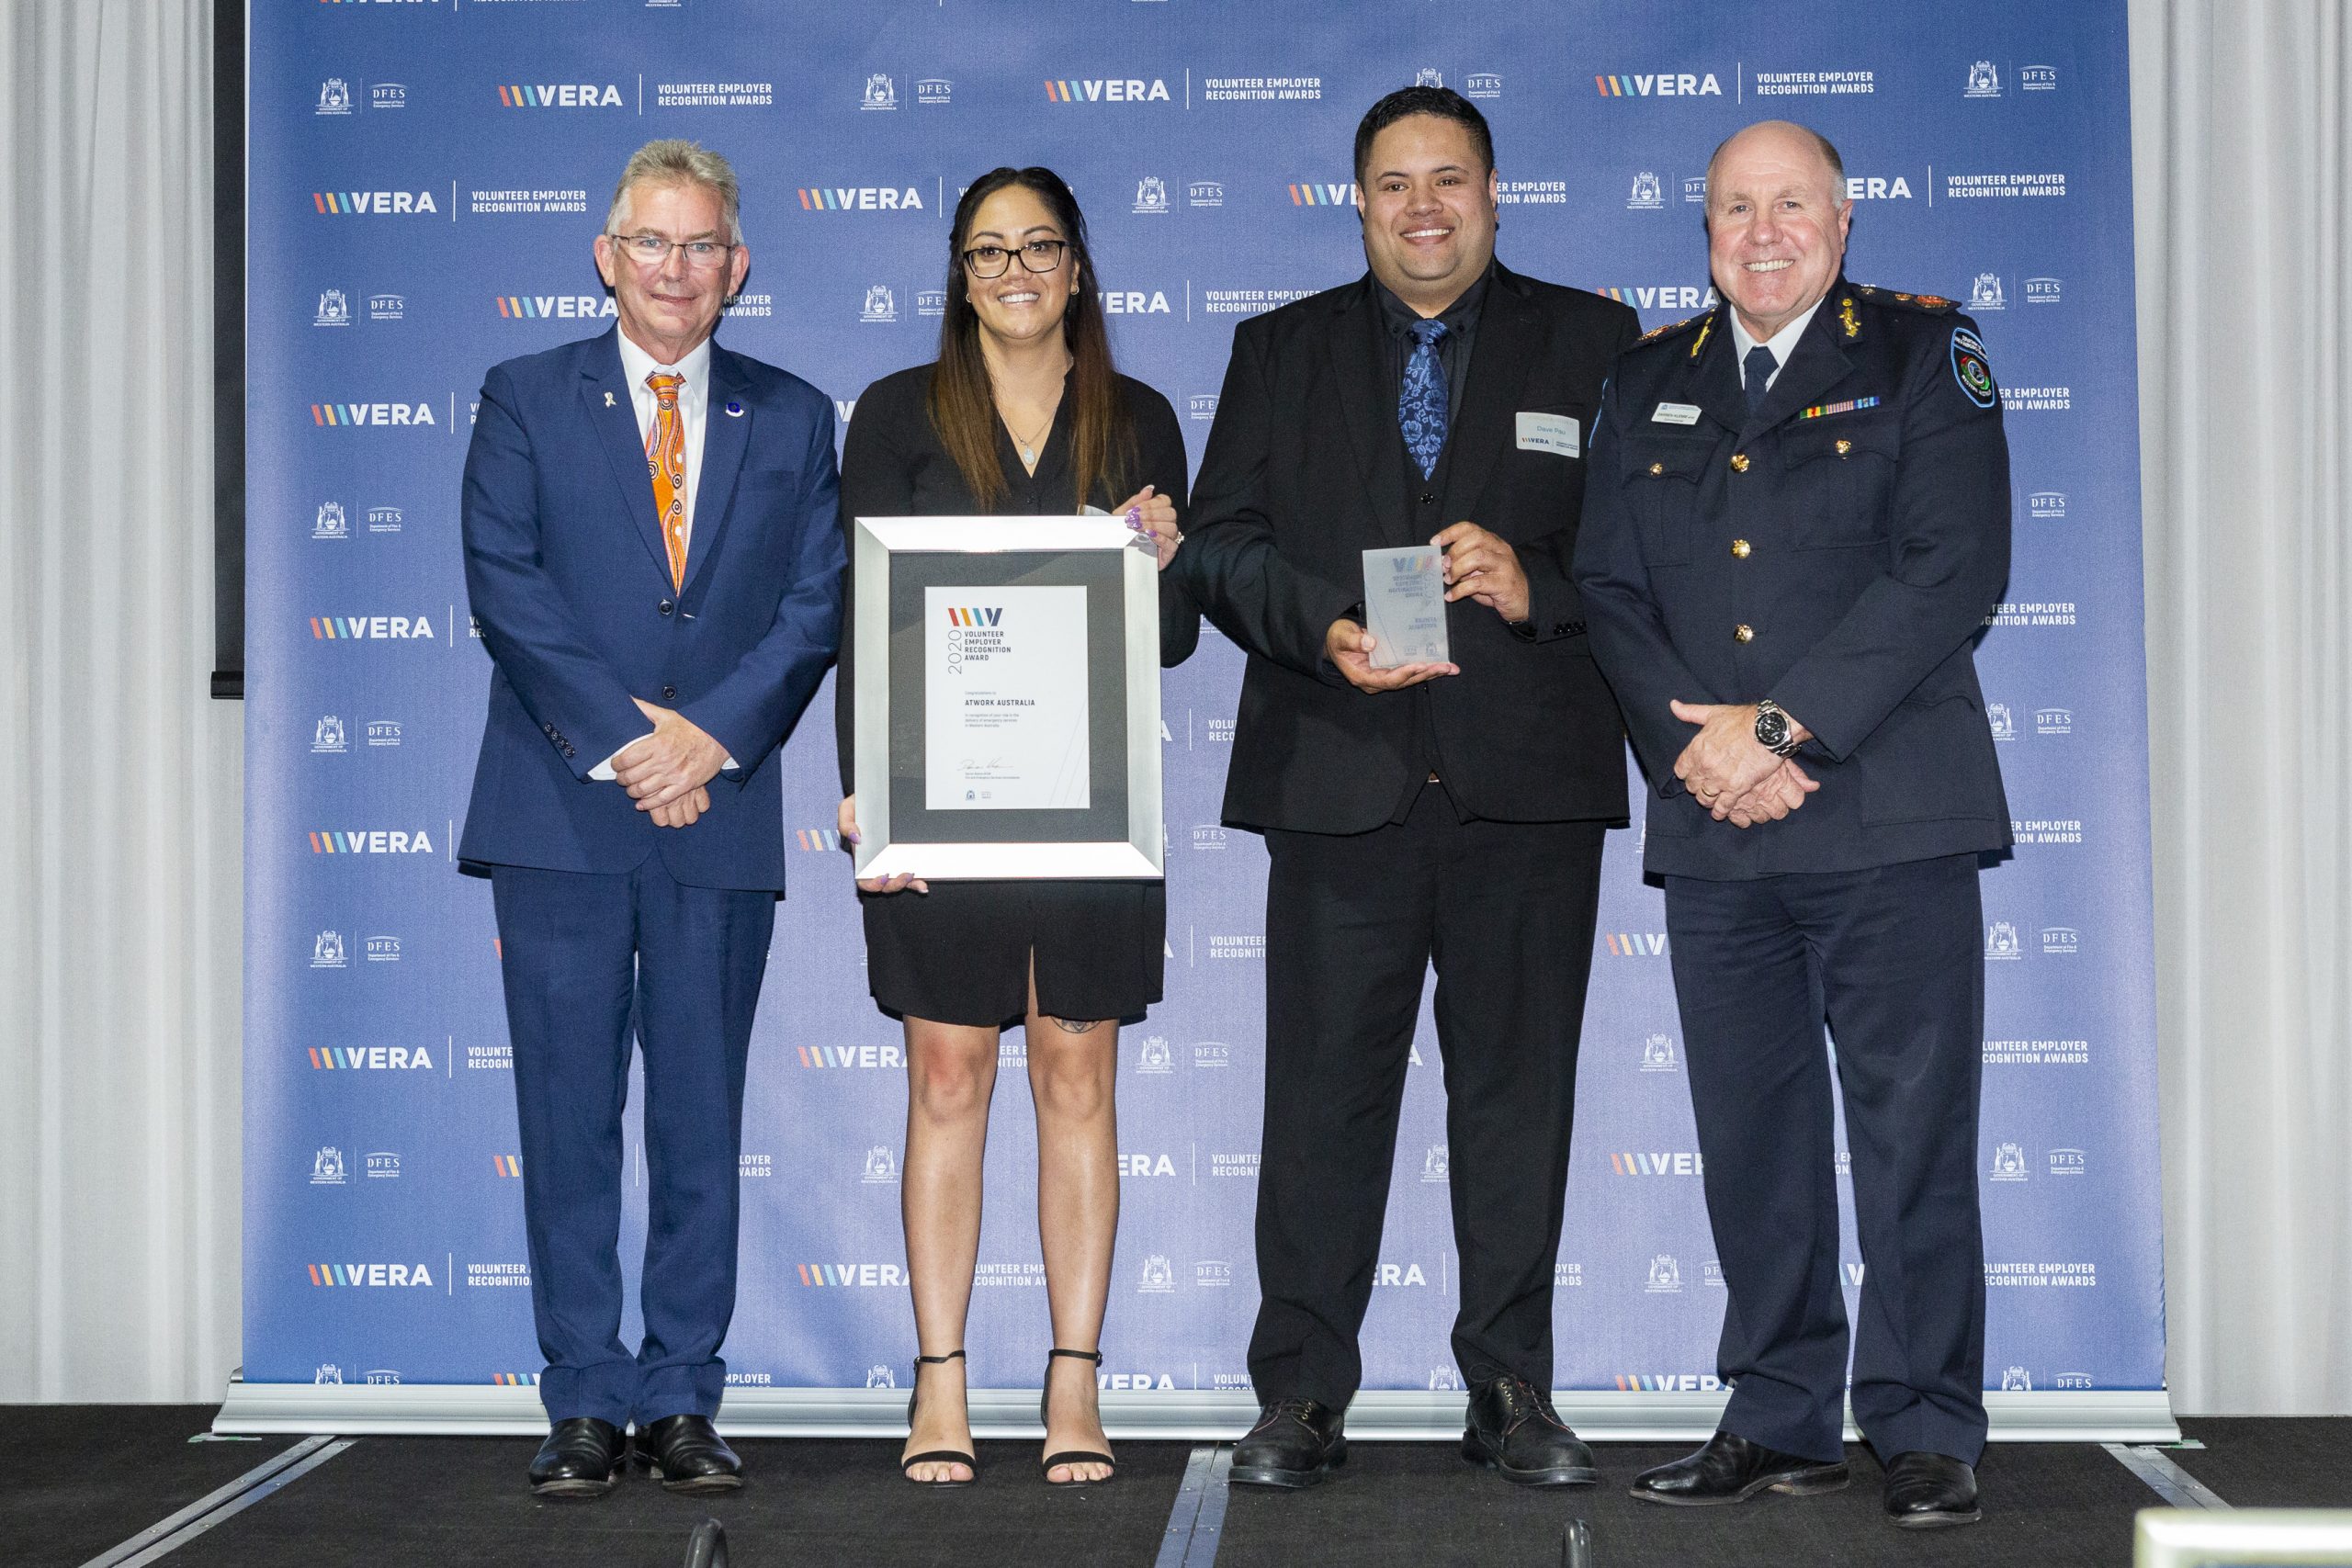 atWork Australia honoured for Emergency Services Volunteer Support